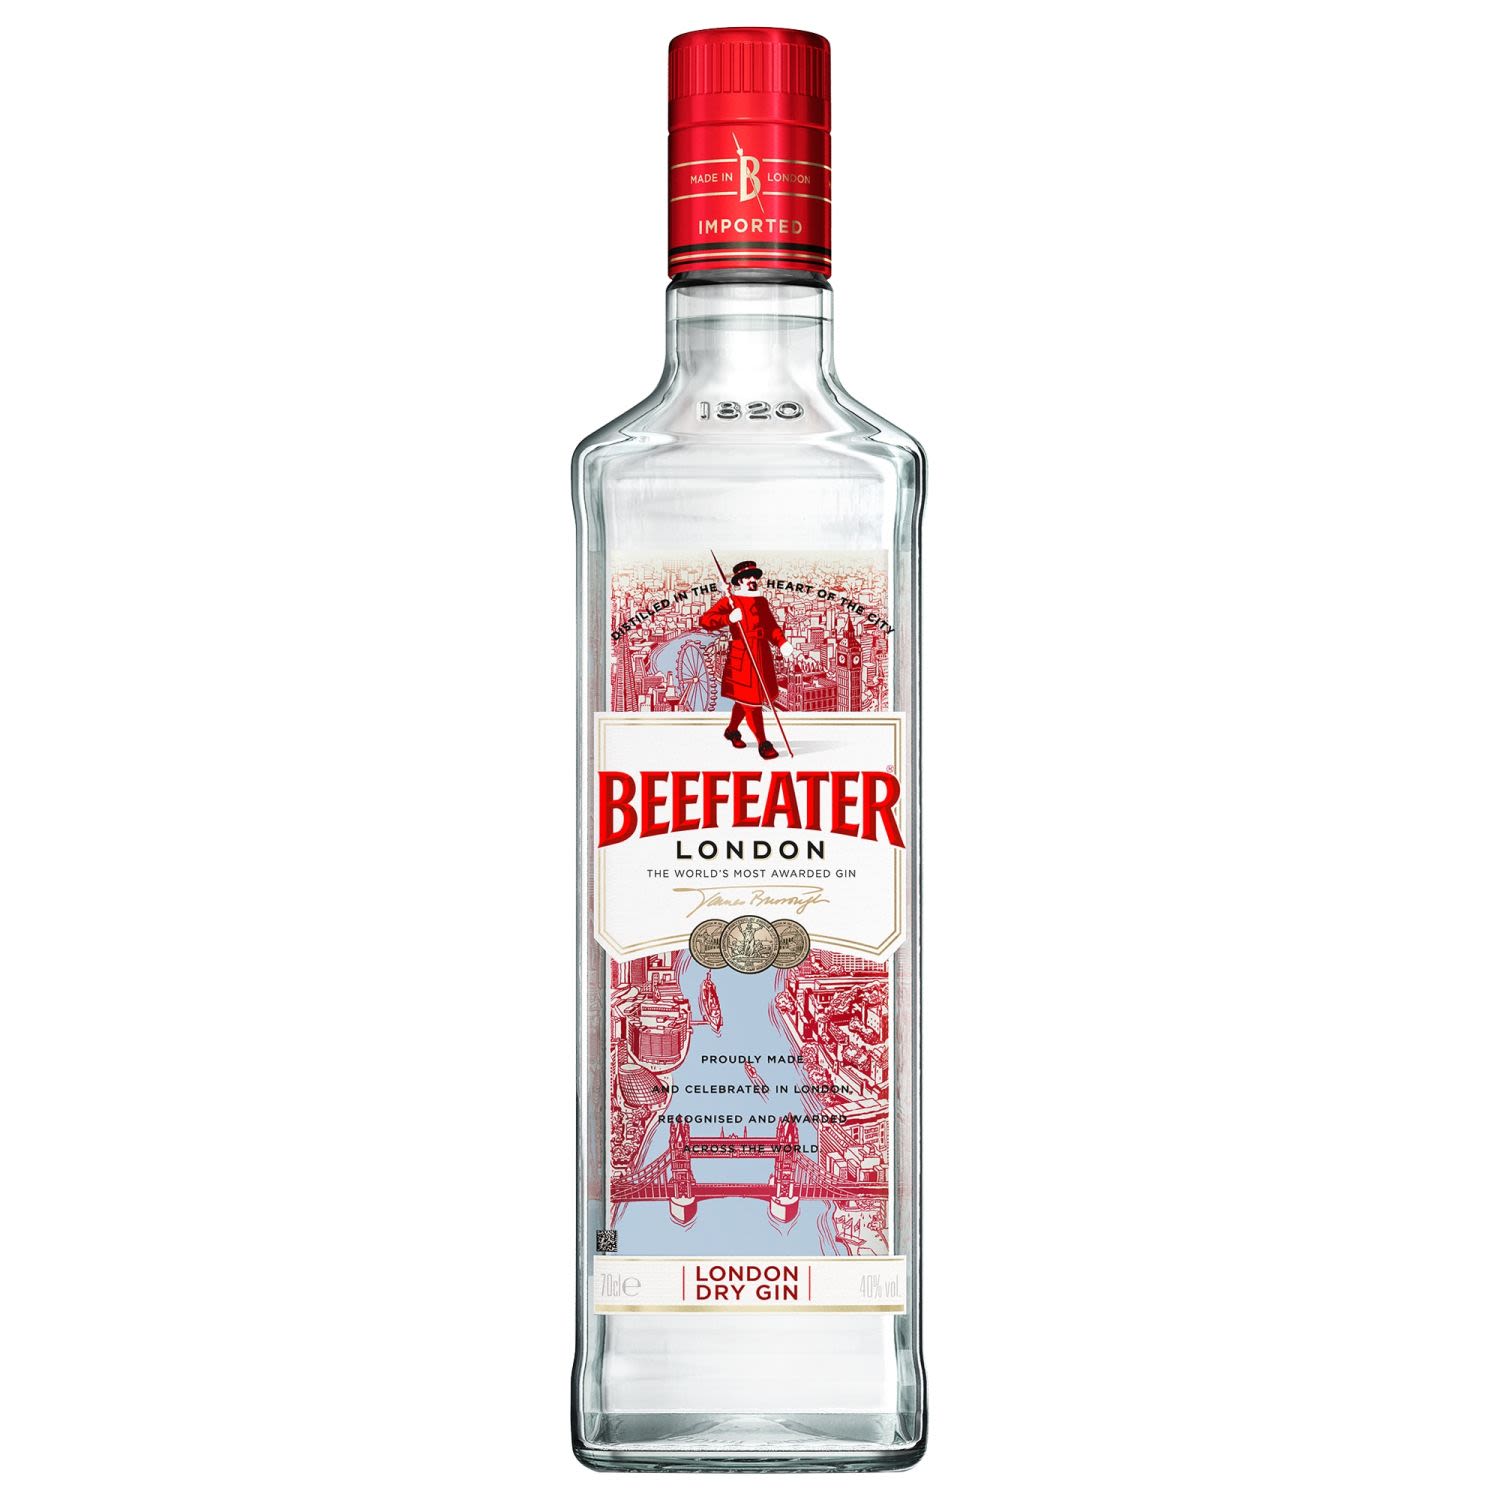 Beefeater is a benchmark in London's Gin market and has been for more than a century. Spicy and fruity aromas with a nice balance and a focus on the juniper along with eight other botanicals. Dry and classy all the way to the finish.<br /> <br />Alcohol Volume: 40.00%<br /><br />Pack Format: Bottle<br /><br />Standard Drinks: 22</br /><br />Pack Type: Bottle<br /><br />Country of Origin: England<br />